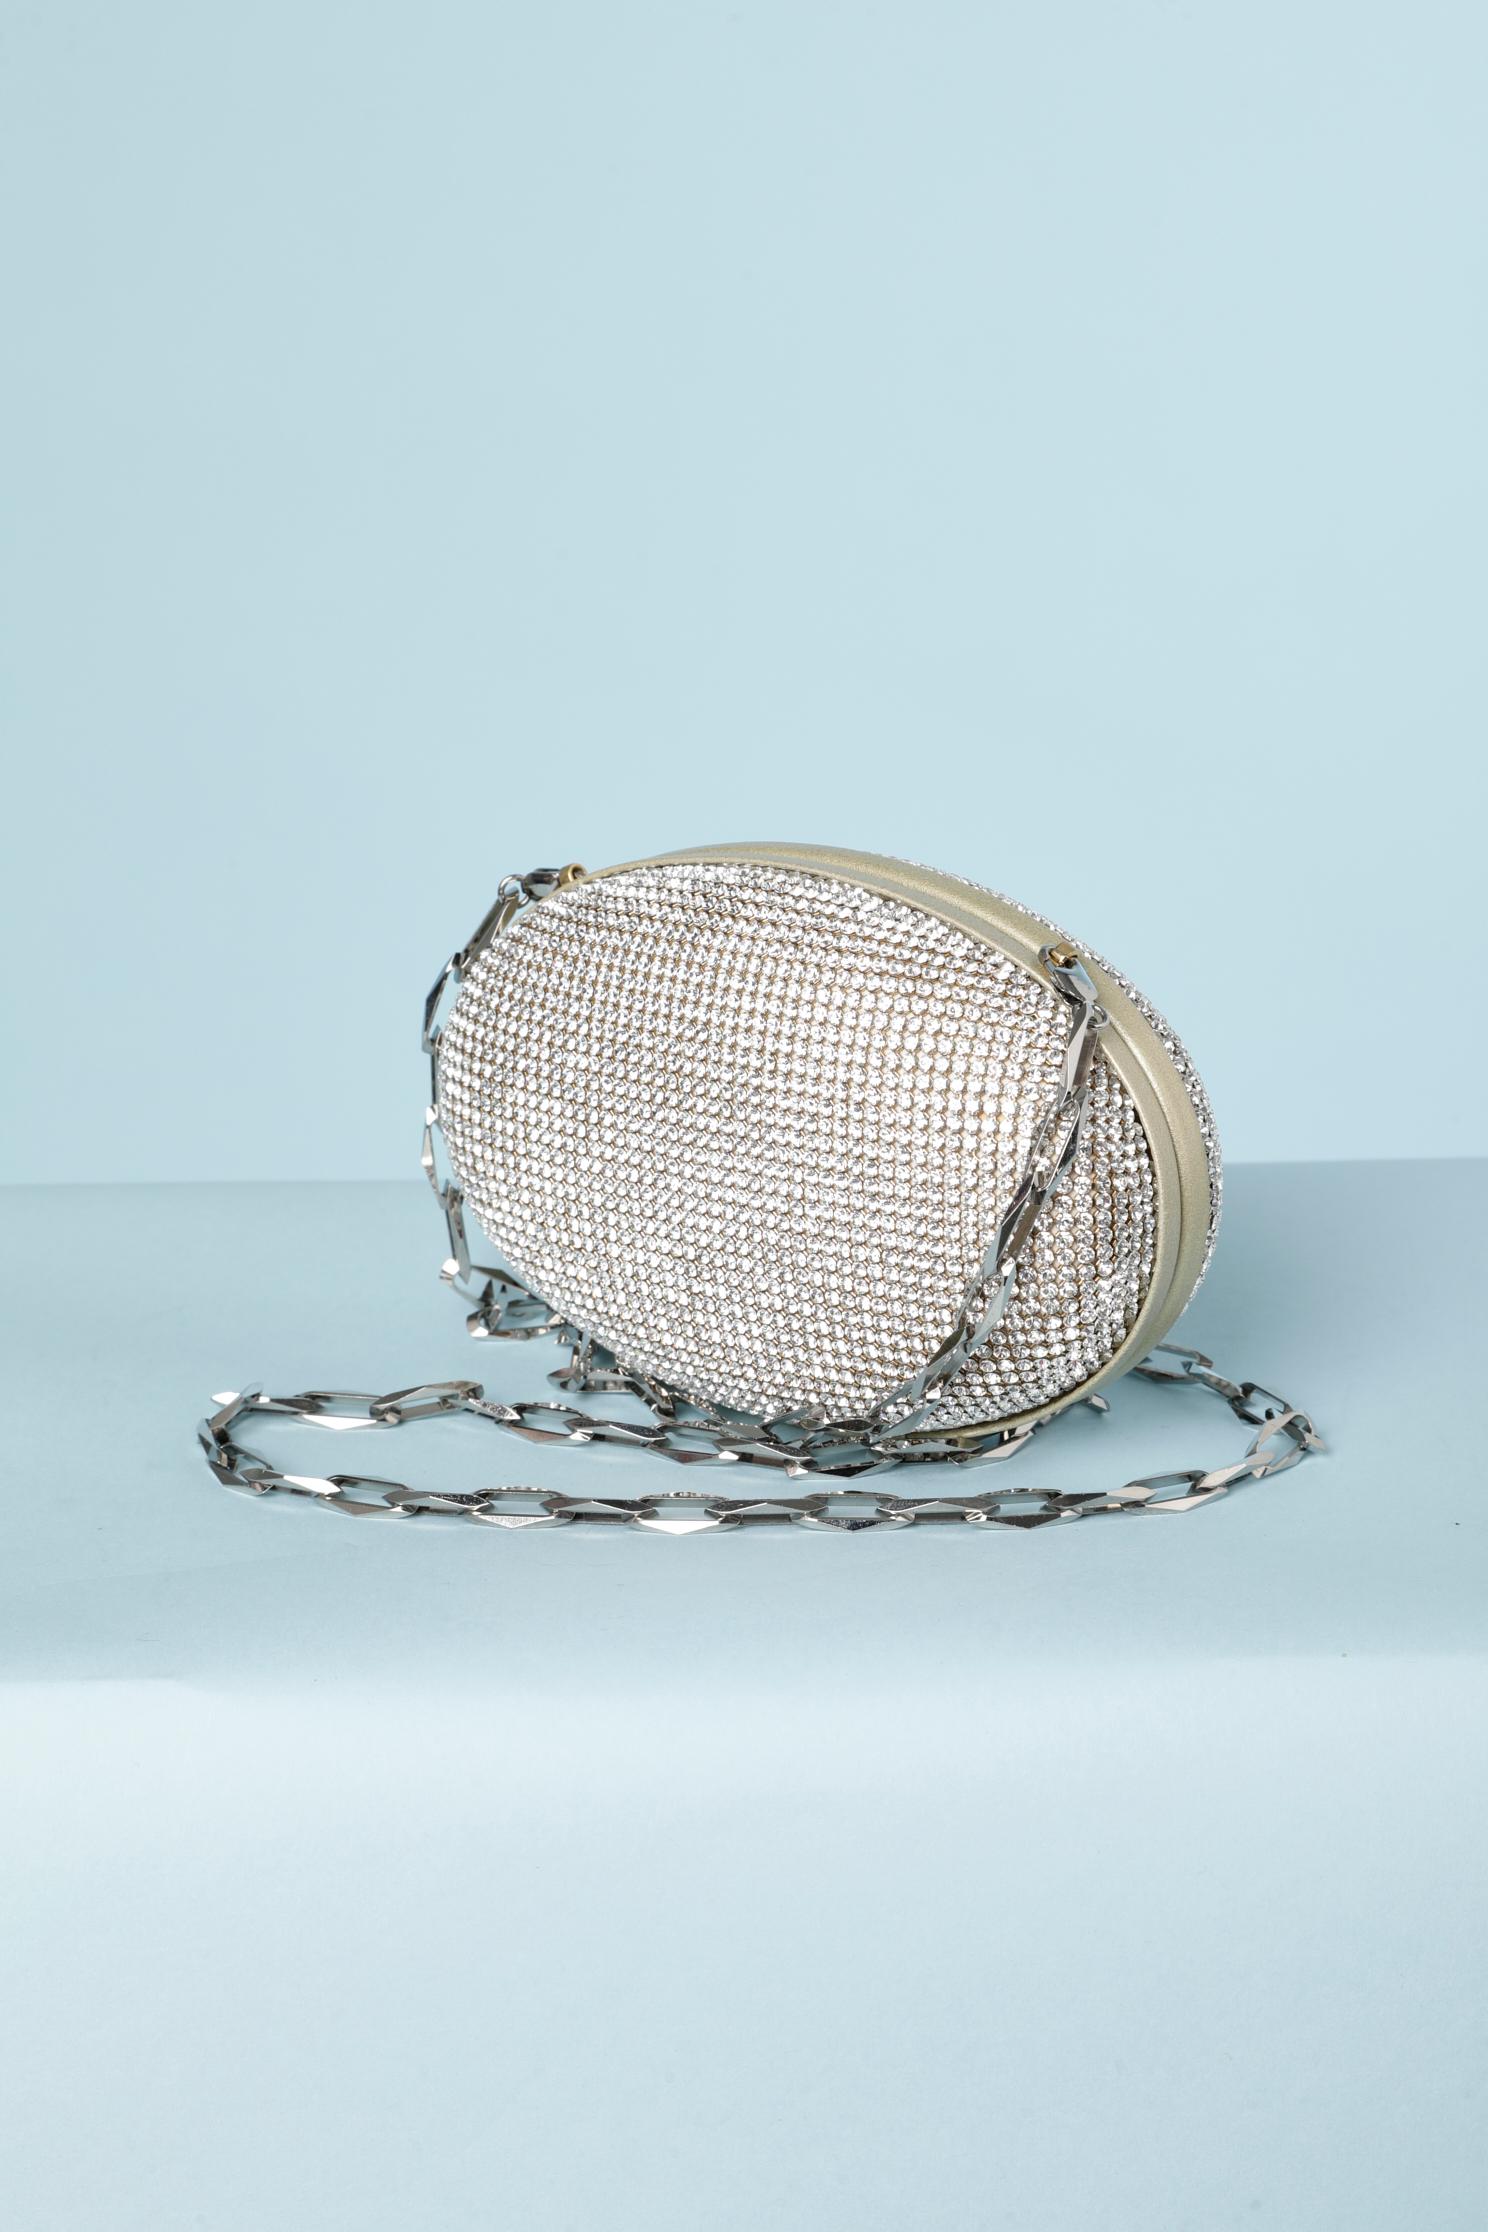 Oval Evening bag in rhinestone and pale gold leather. Strap in smoked metallic silver. 
Size: 15 cm X 10 cm X 4 cm 
Lining and edge in pale gold leather. 
Detachable strap. 